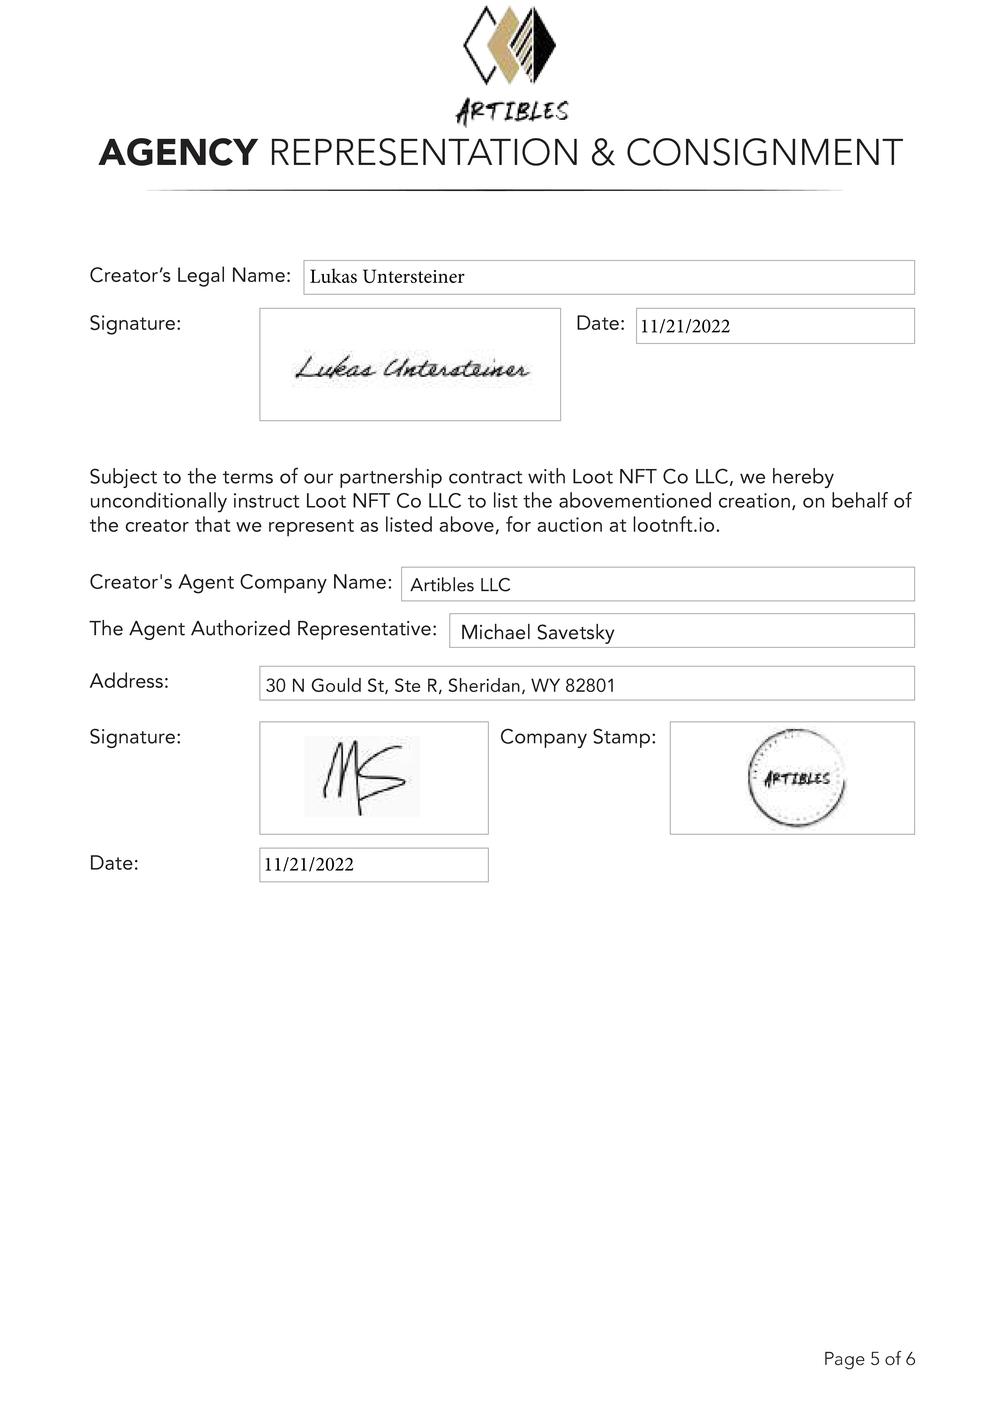 Certificate of Authenticity and Consignment - Forest.pdf